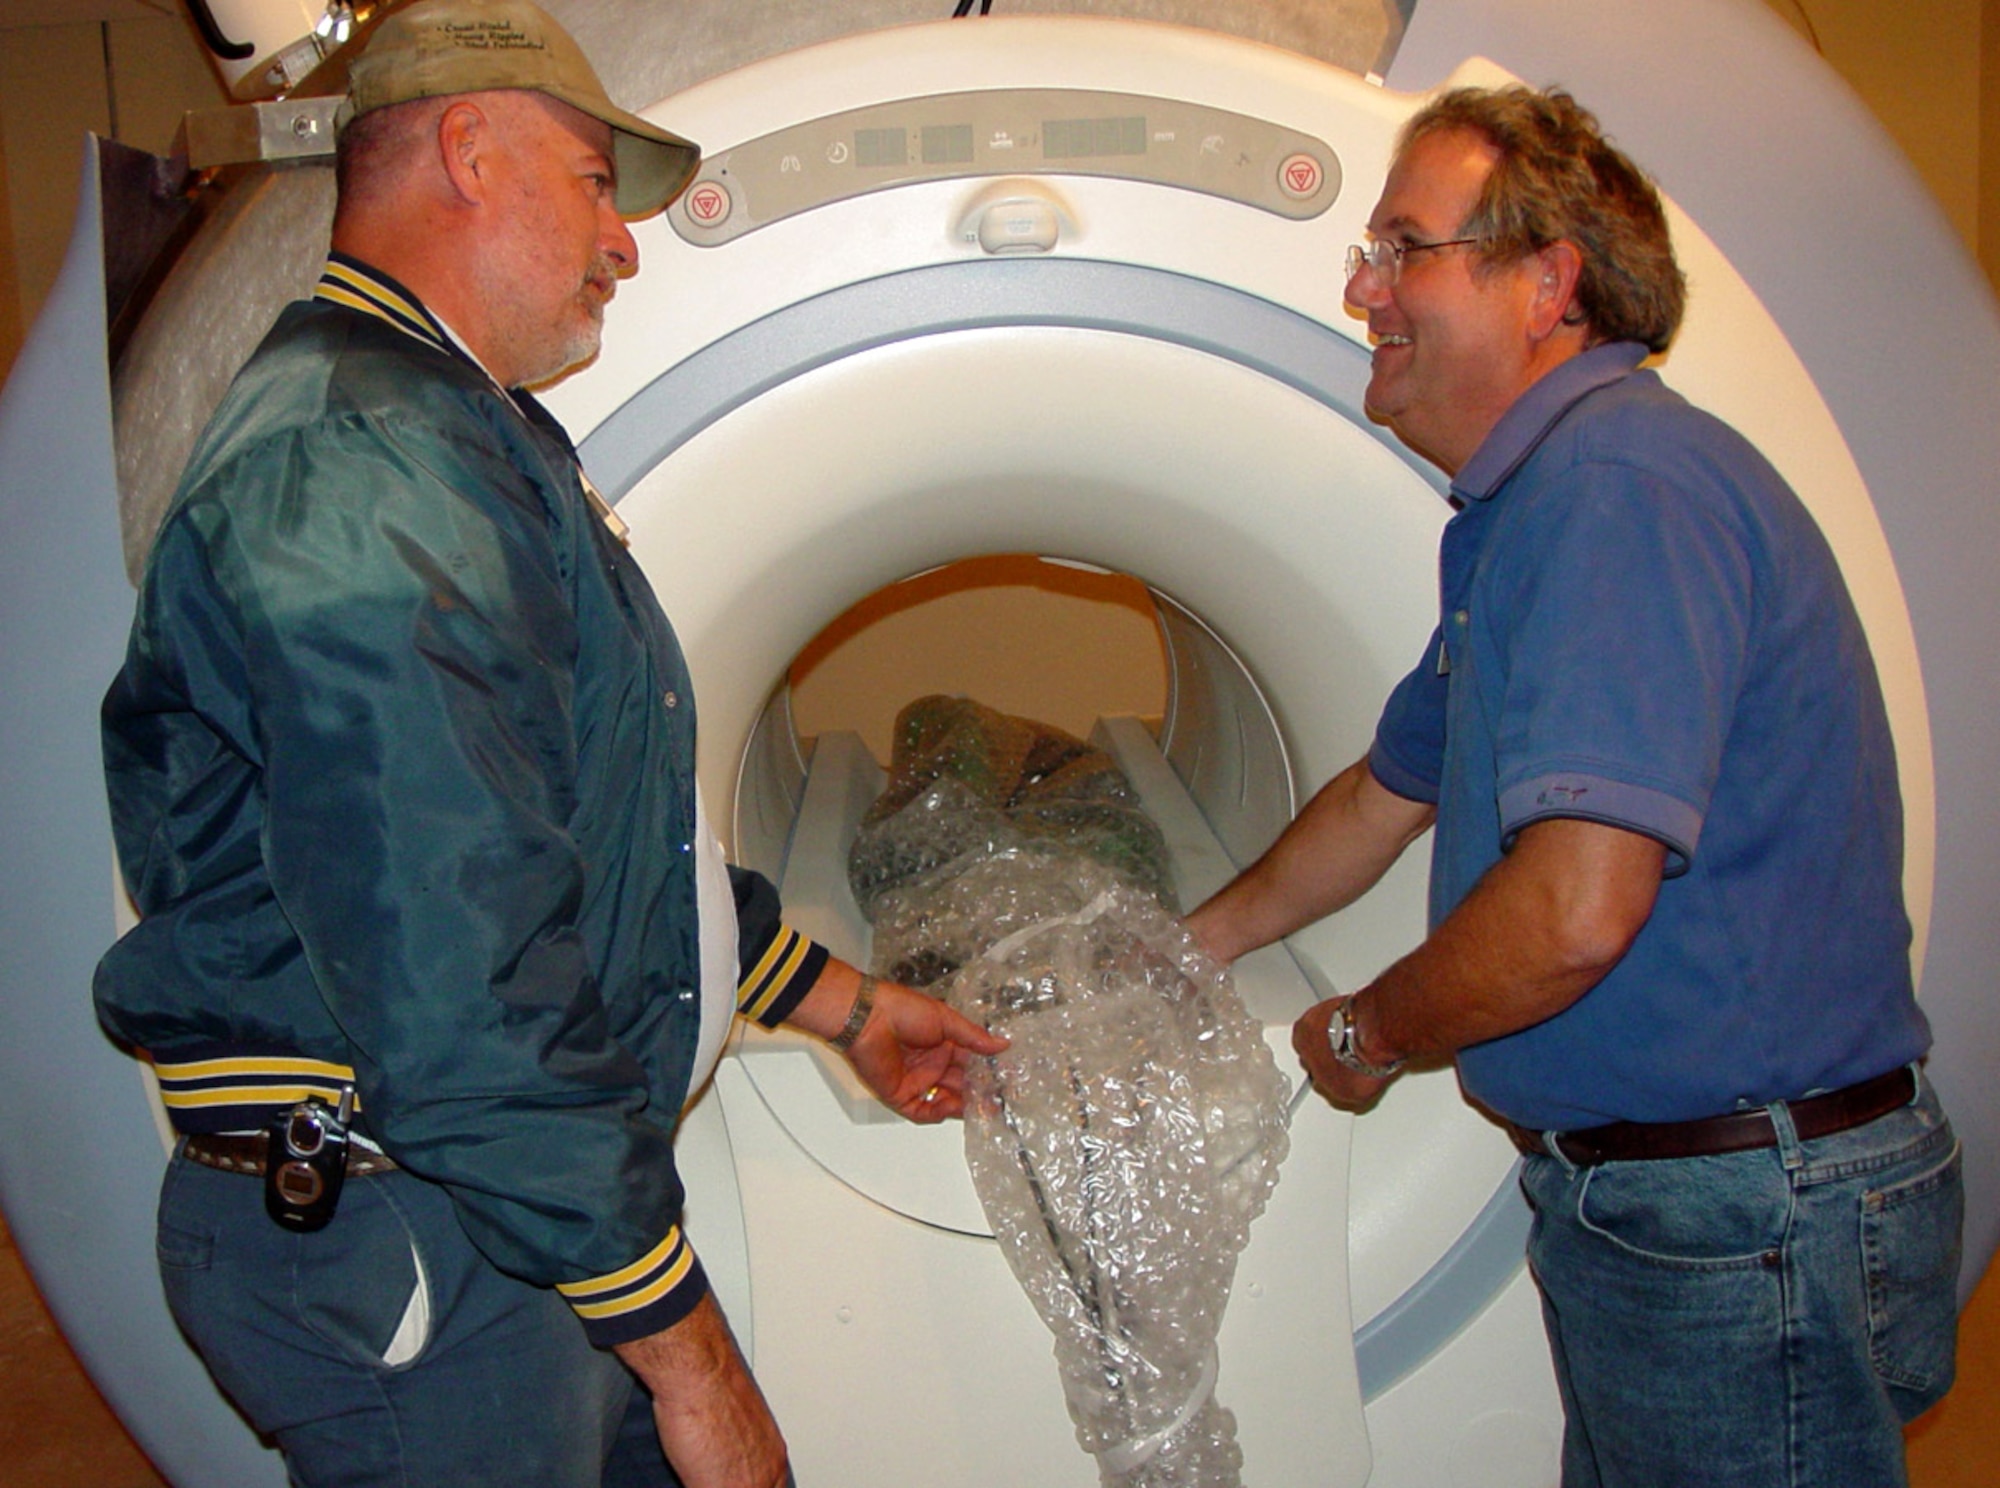 Gary Chambliss and Michael Alexander discuss the project to install Keesler Medical Center's new magnetic resonance imaging system Dec. 7 at Keesler Air Force Base, Miss. Caffey, Inc., crews look to install and have the system up and running in January, about half the time it normally takes to install similar equipment. Mr. Chambliss is superintendent for Caffey, Inc. Mr. Alexander is project manager for installations for General Electric Healthcare Technologies. (U.S. Air Force photo/Steve Pivnick)